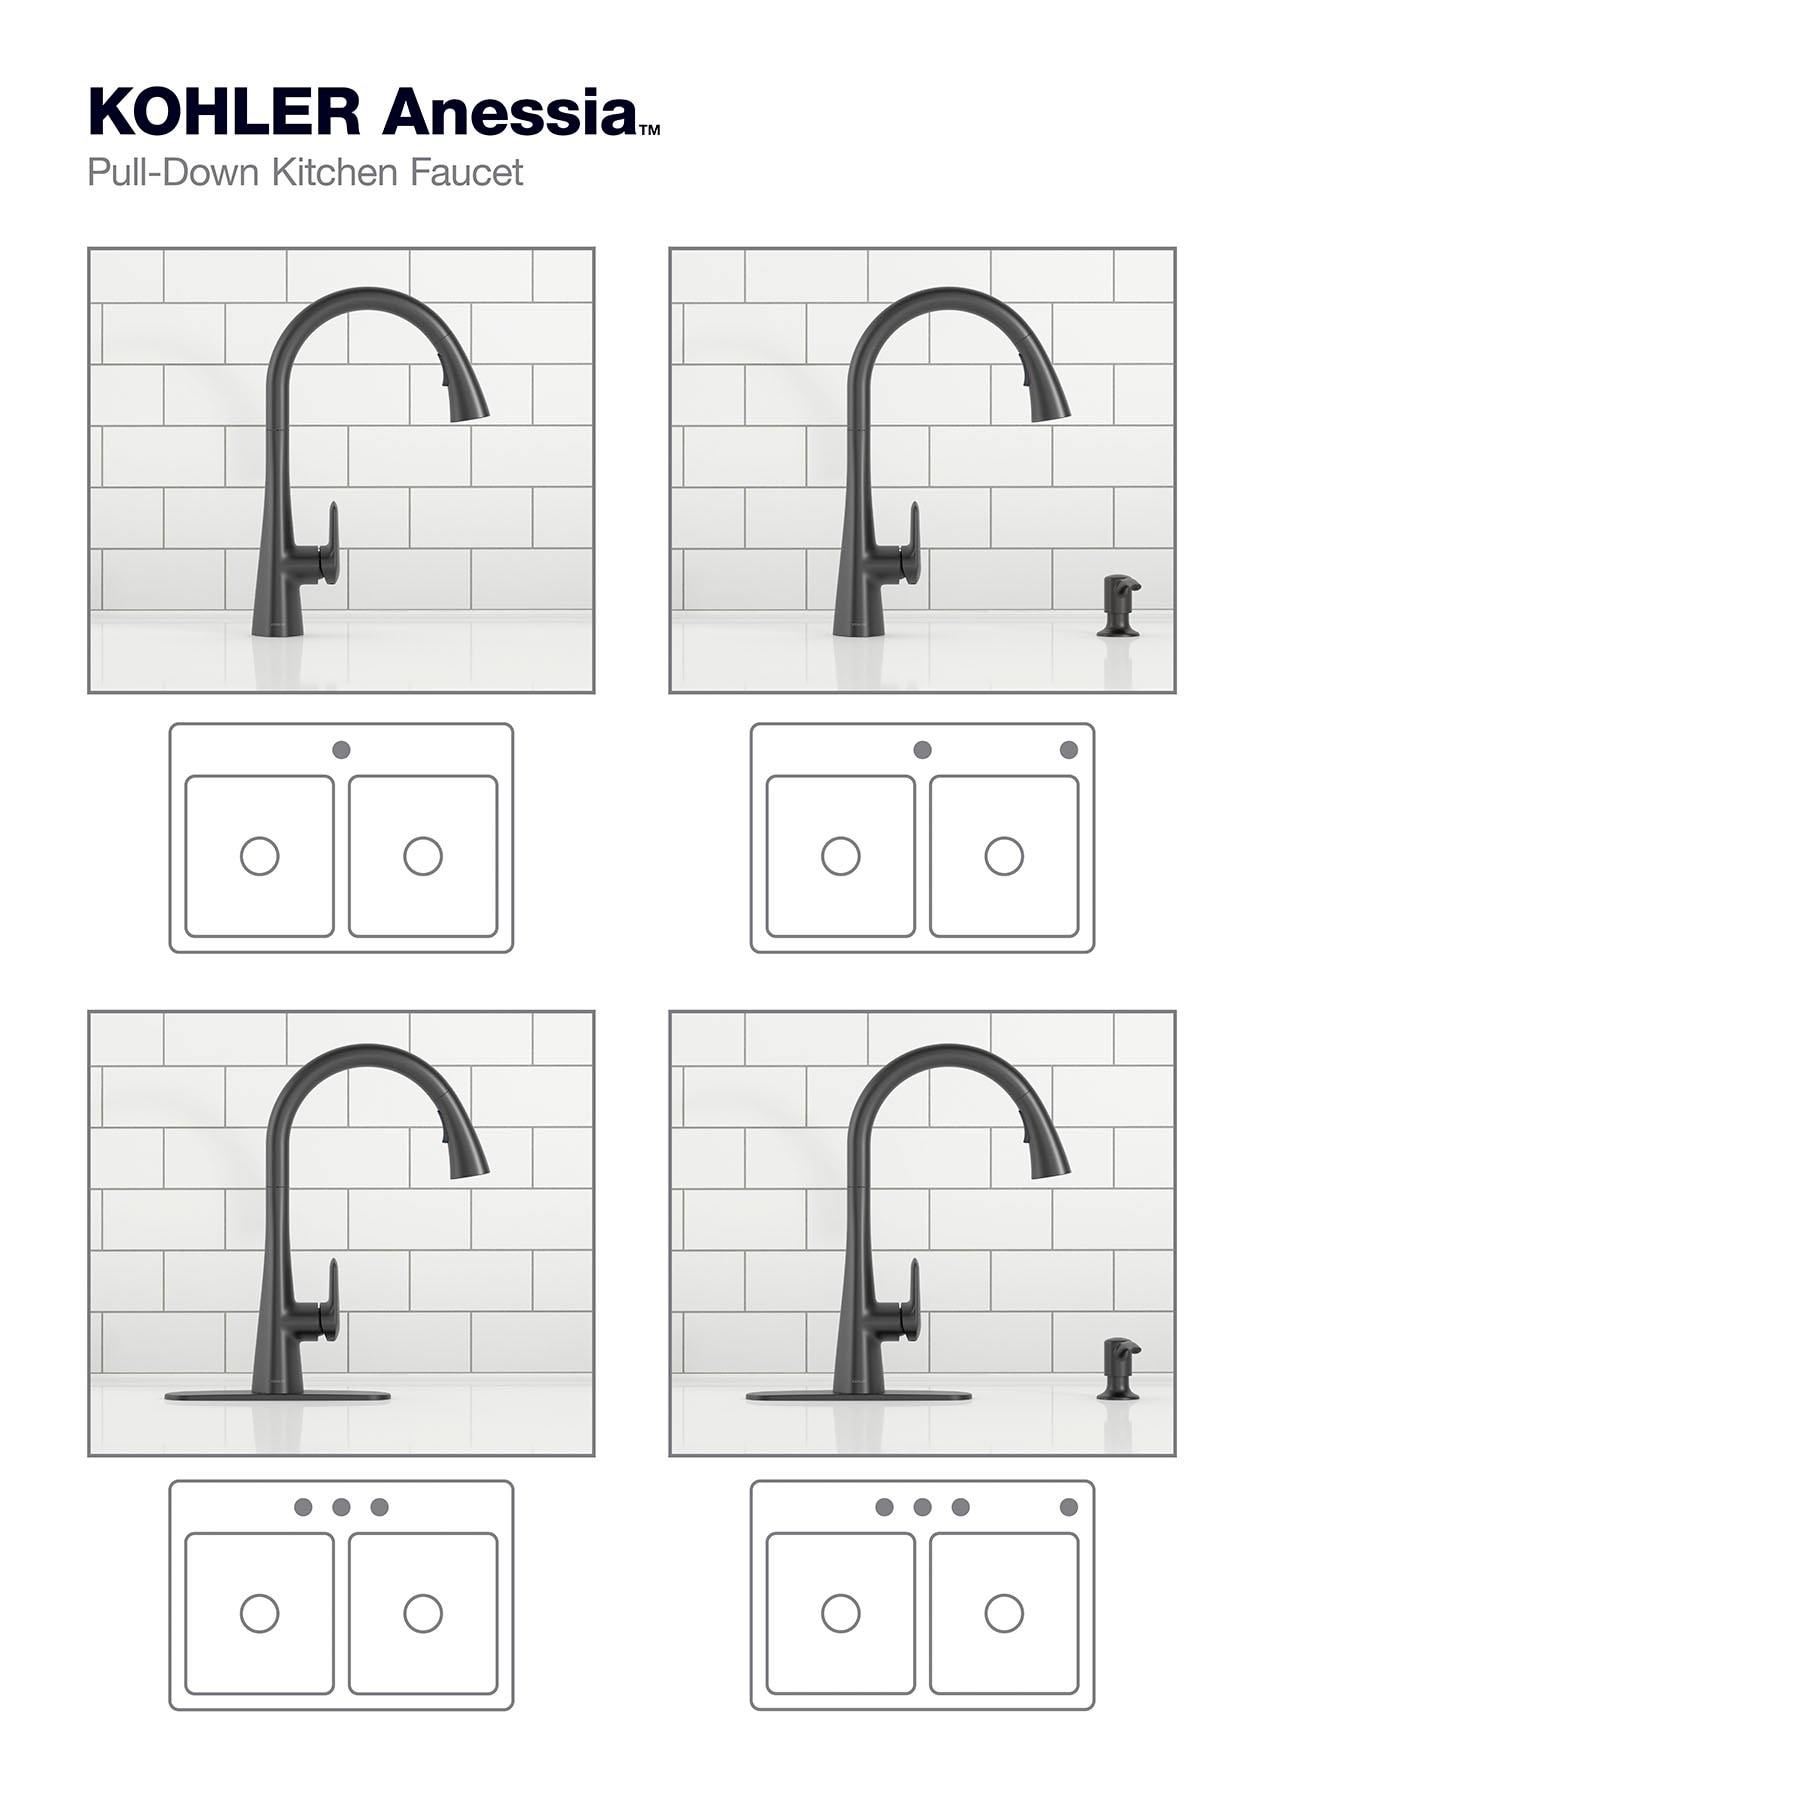 KOHLER Anessia Matte Black 2-handle Pull-down Kitchen Faucet with